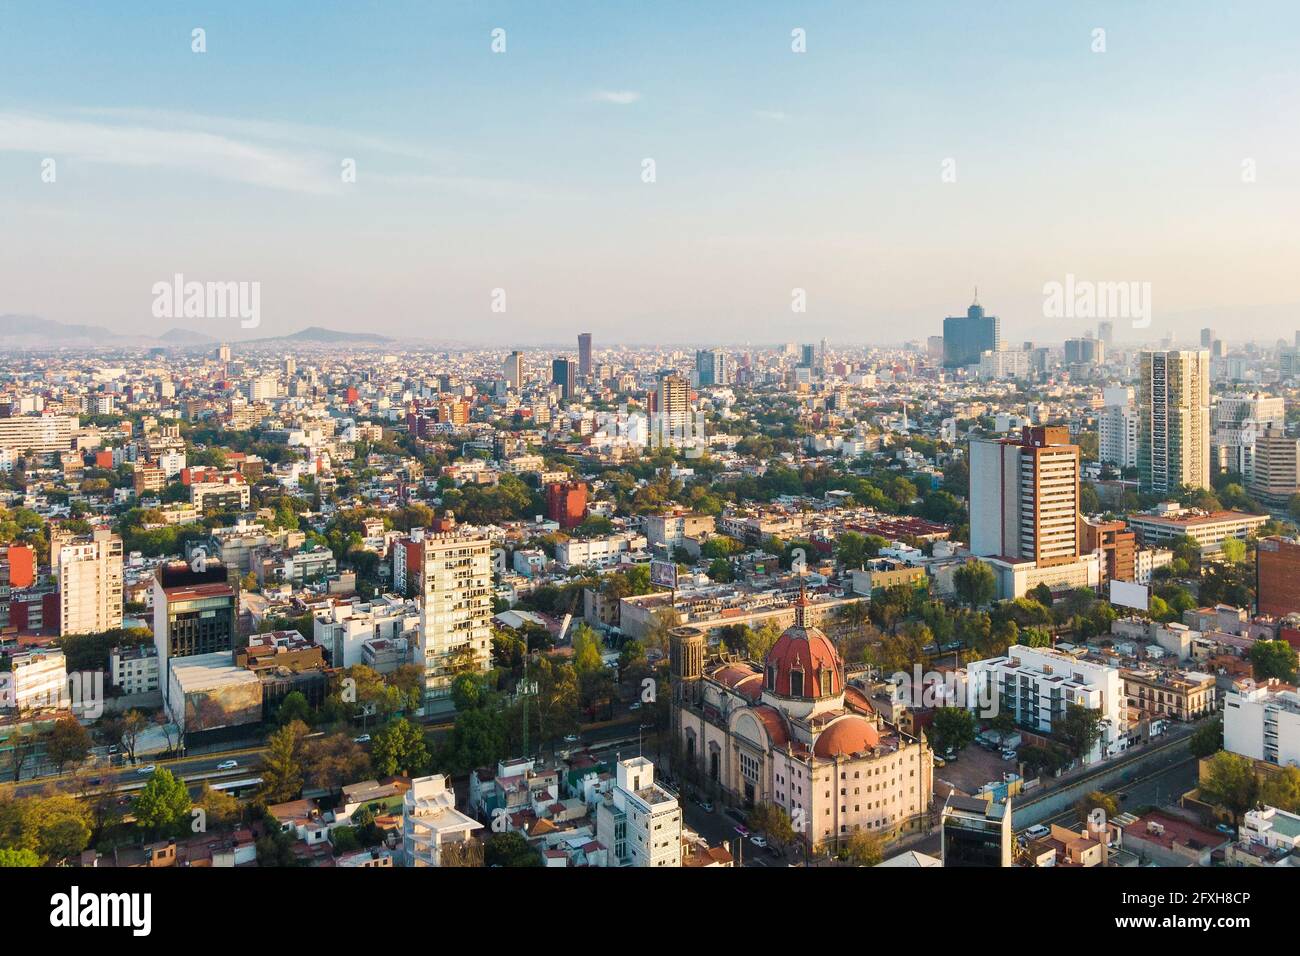 Daytime aerial view of Mexico City, Mexico. Stock Photo